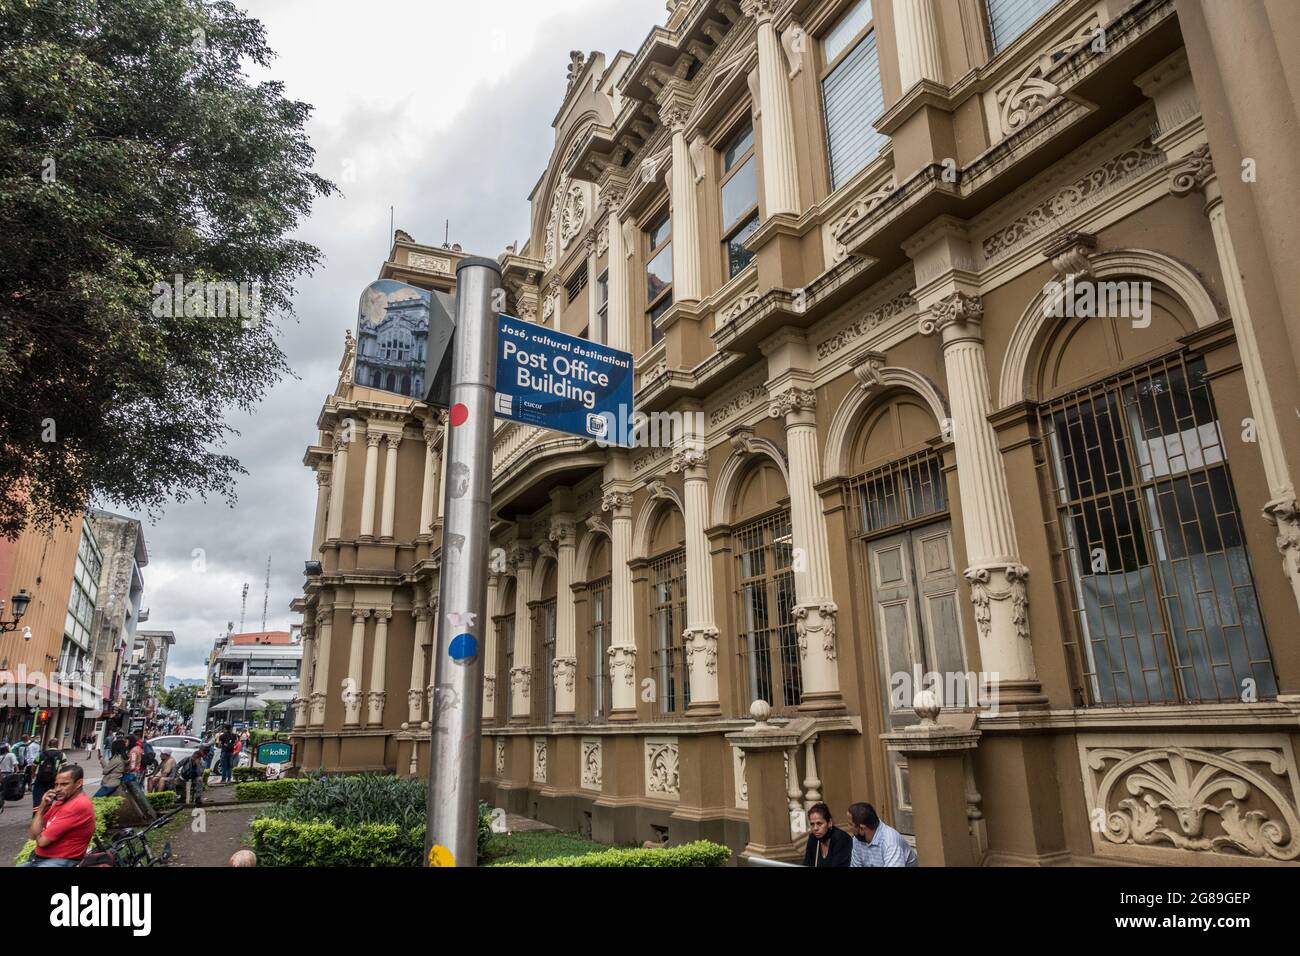 The elegant 104 year old Post Office building in San Jose, Costa Rica. Stock Photo